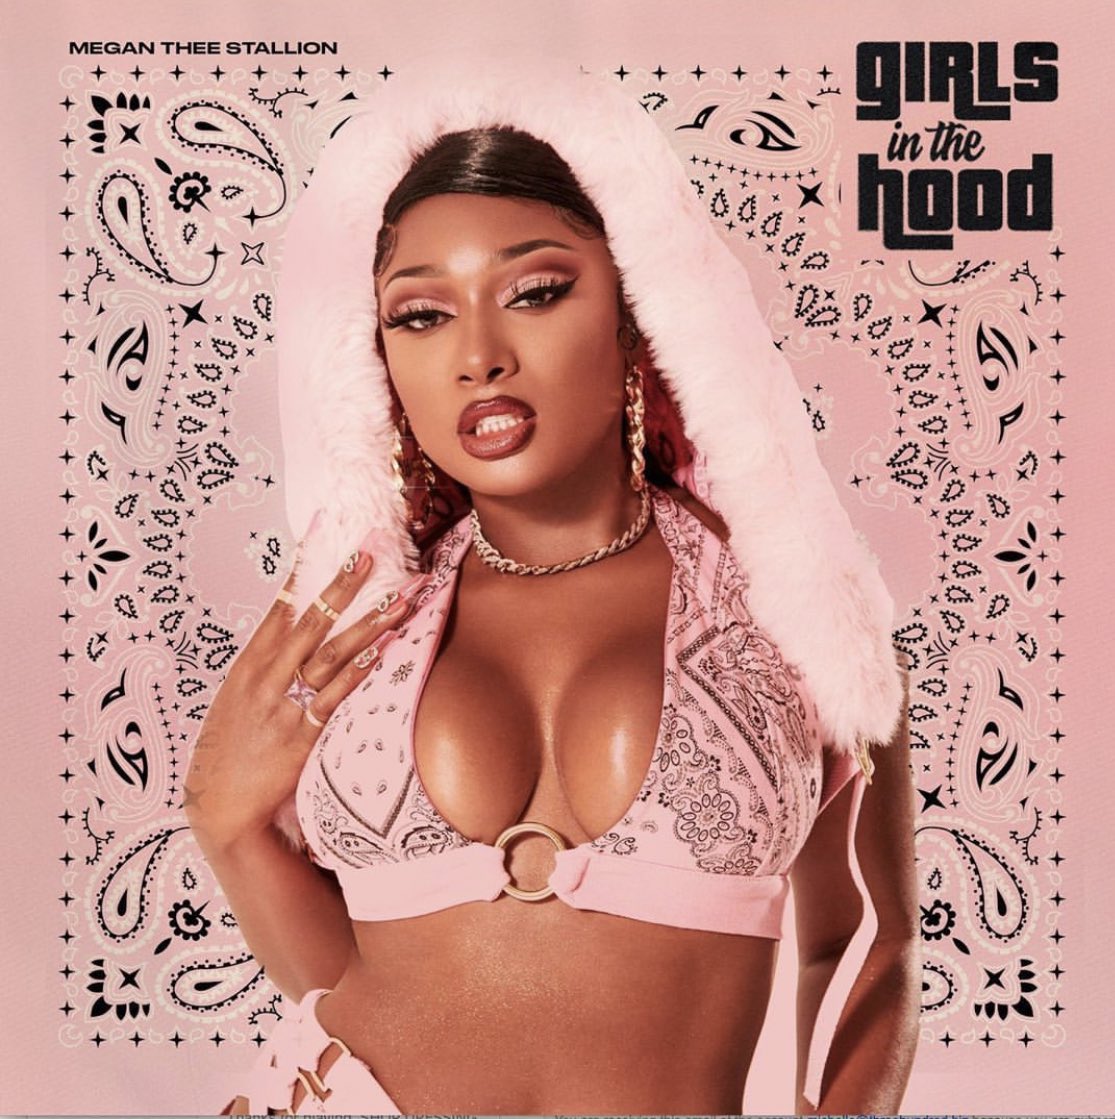 Megan releases new solo single “Girls in the Hood” following Savage Remix’s huge commercial success